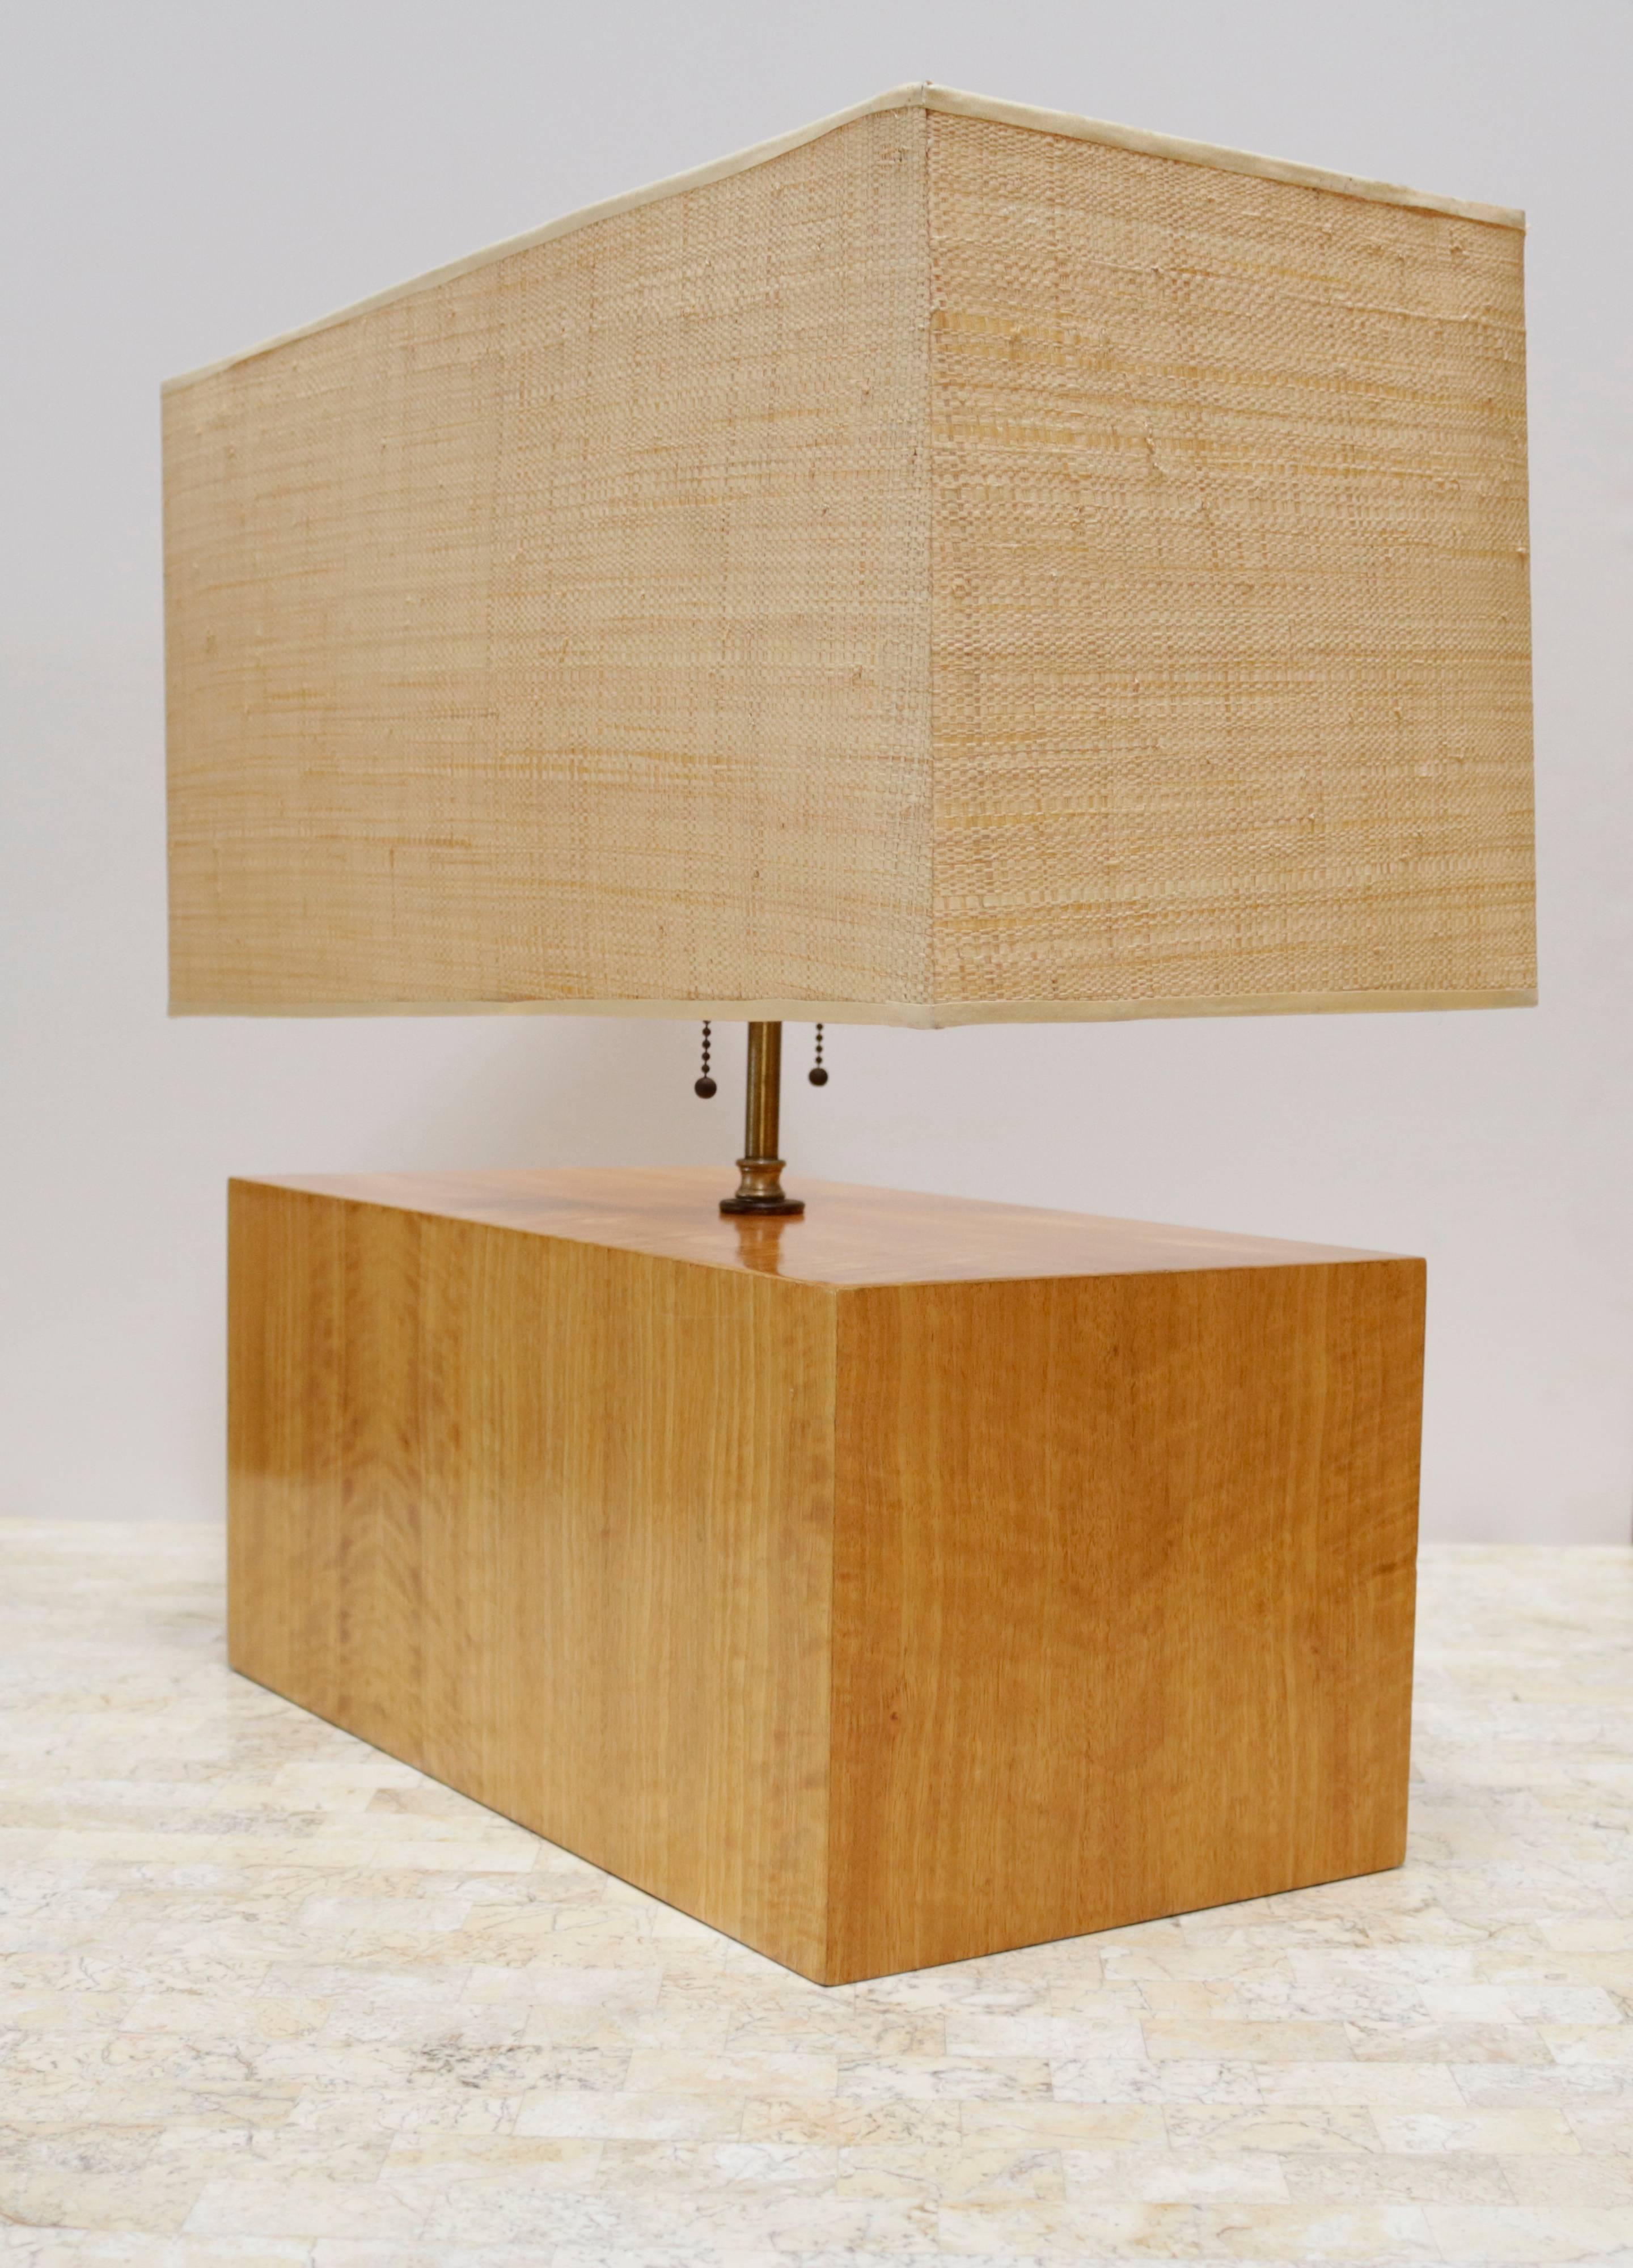 Rectangular zebra wood table lamp with original woven shade. Made of lustrous wood that has a highly reflective, almost iridescent grain. Features two lightbulbs and pull chains. Wood base measures 8.0" high.